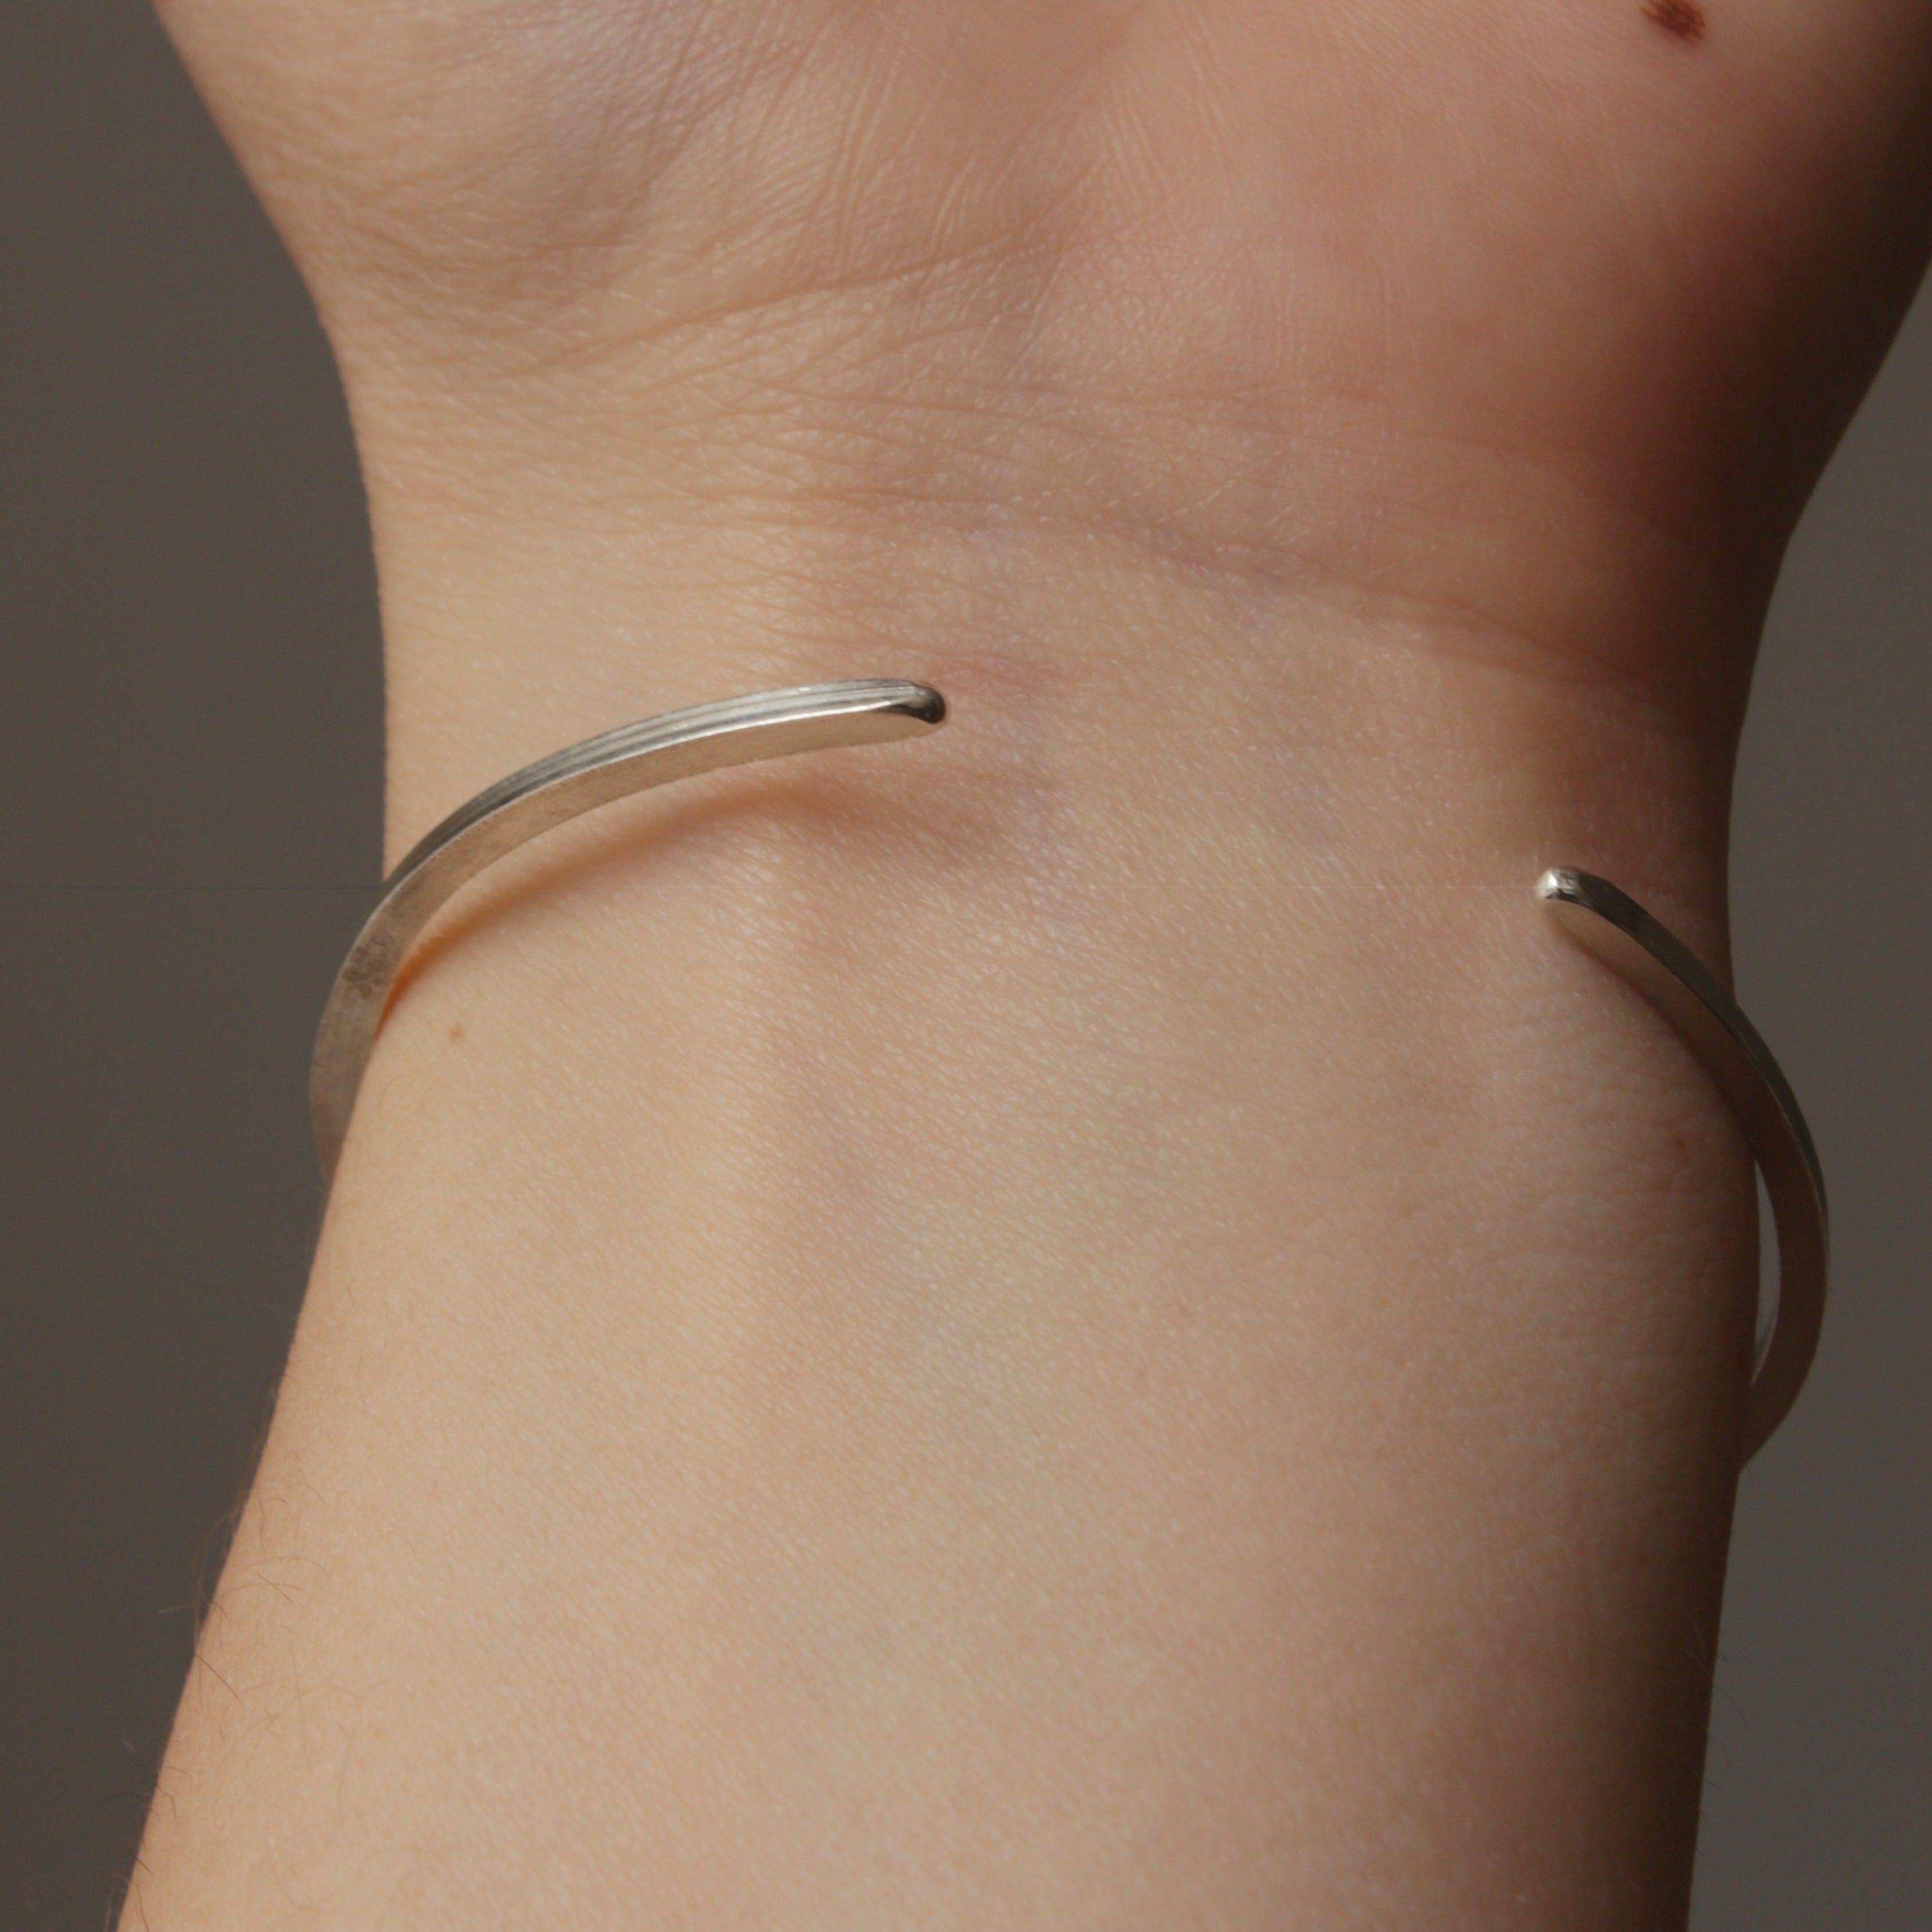 This delicate silver bangle is hammered flat and features a soft texture on one side and a smooth texture on the other side. This bangle is fully adjustable and ready to fit all wrist sizes.